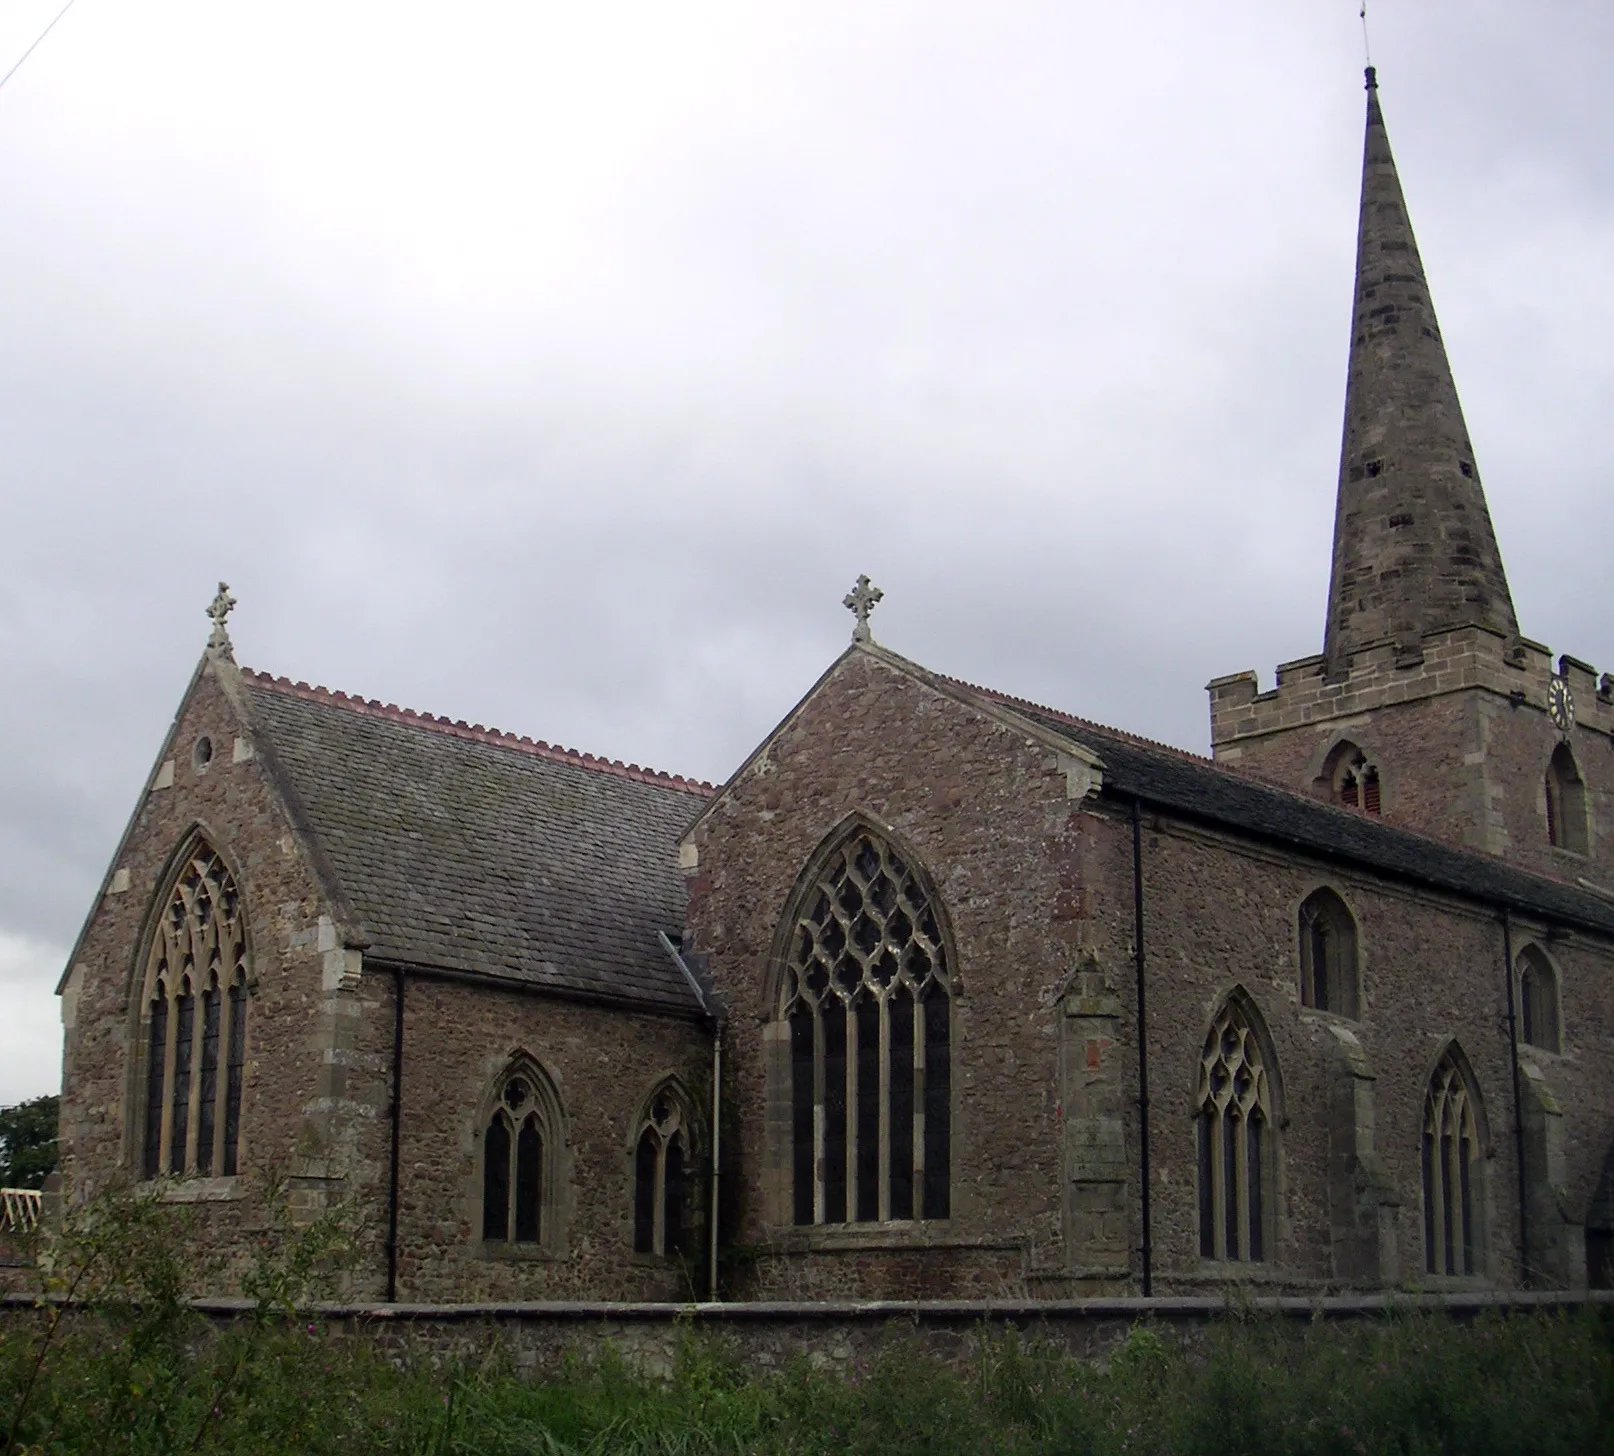 Image of Broughton Astley